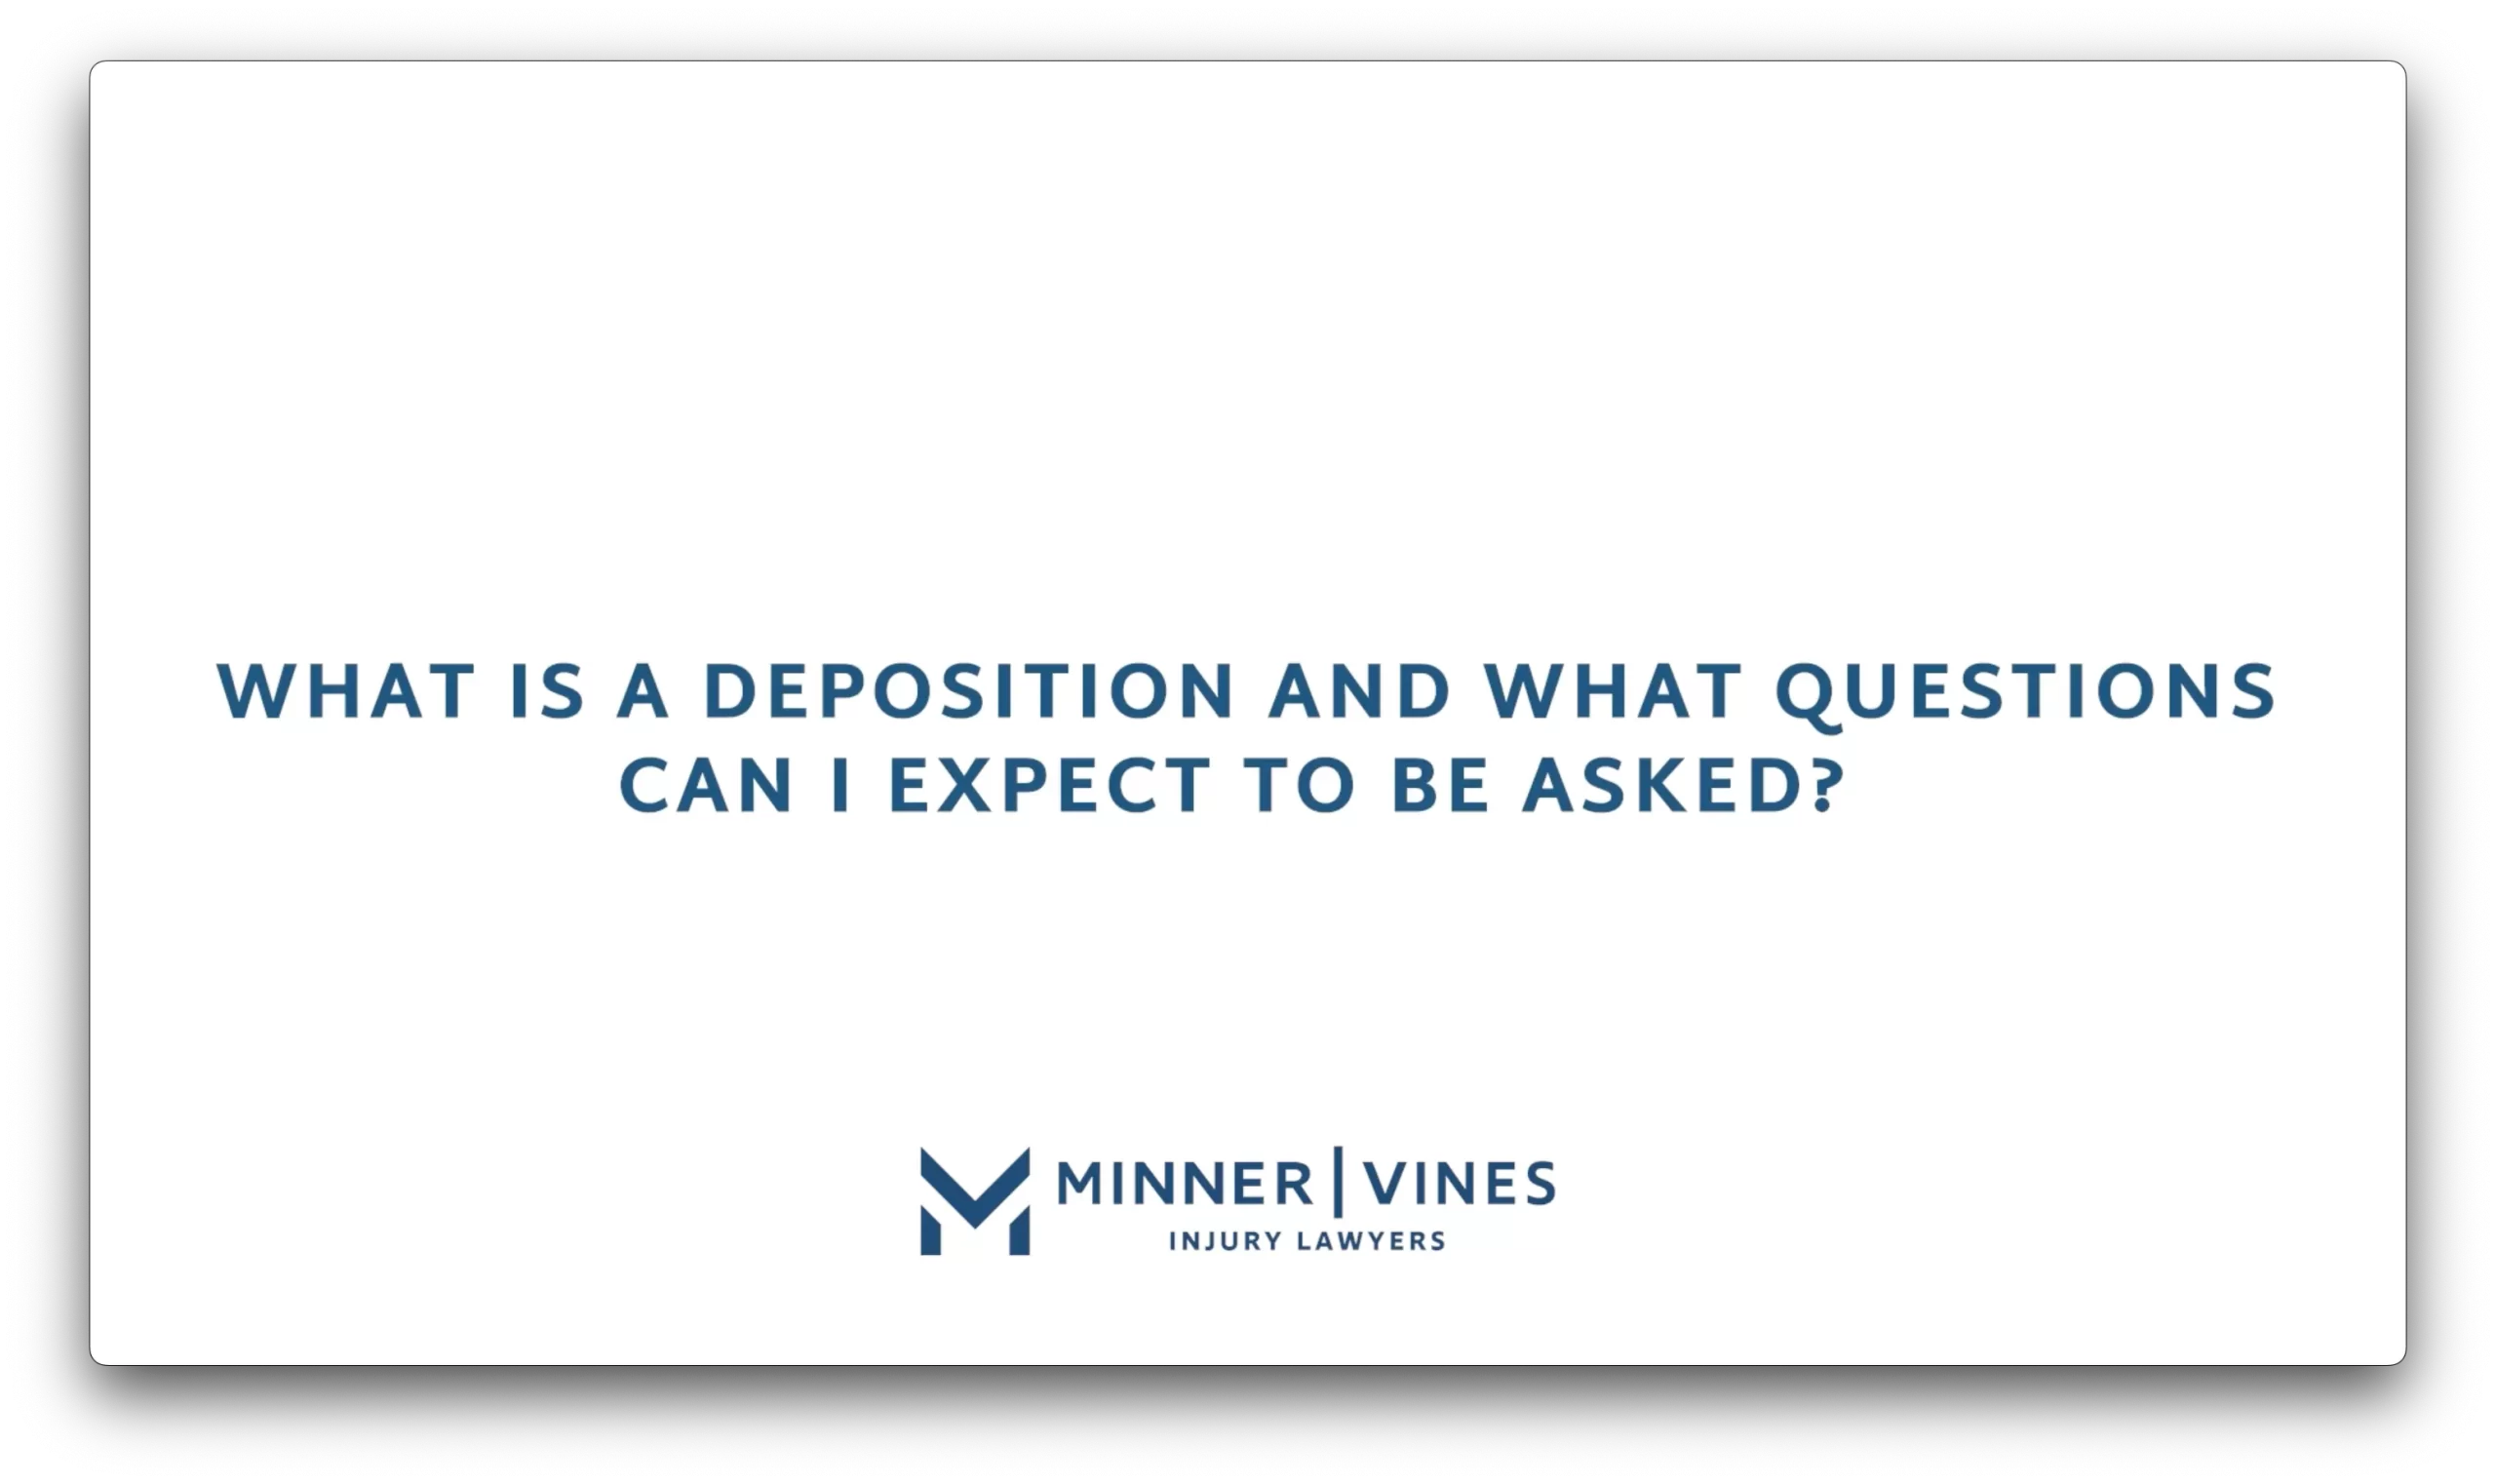 What is a deposition and what questions can I expect to be asked?